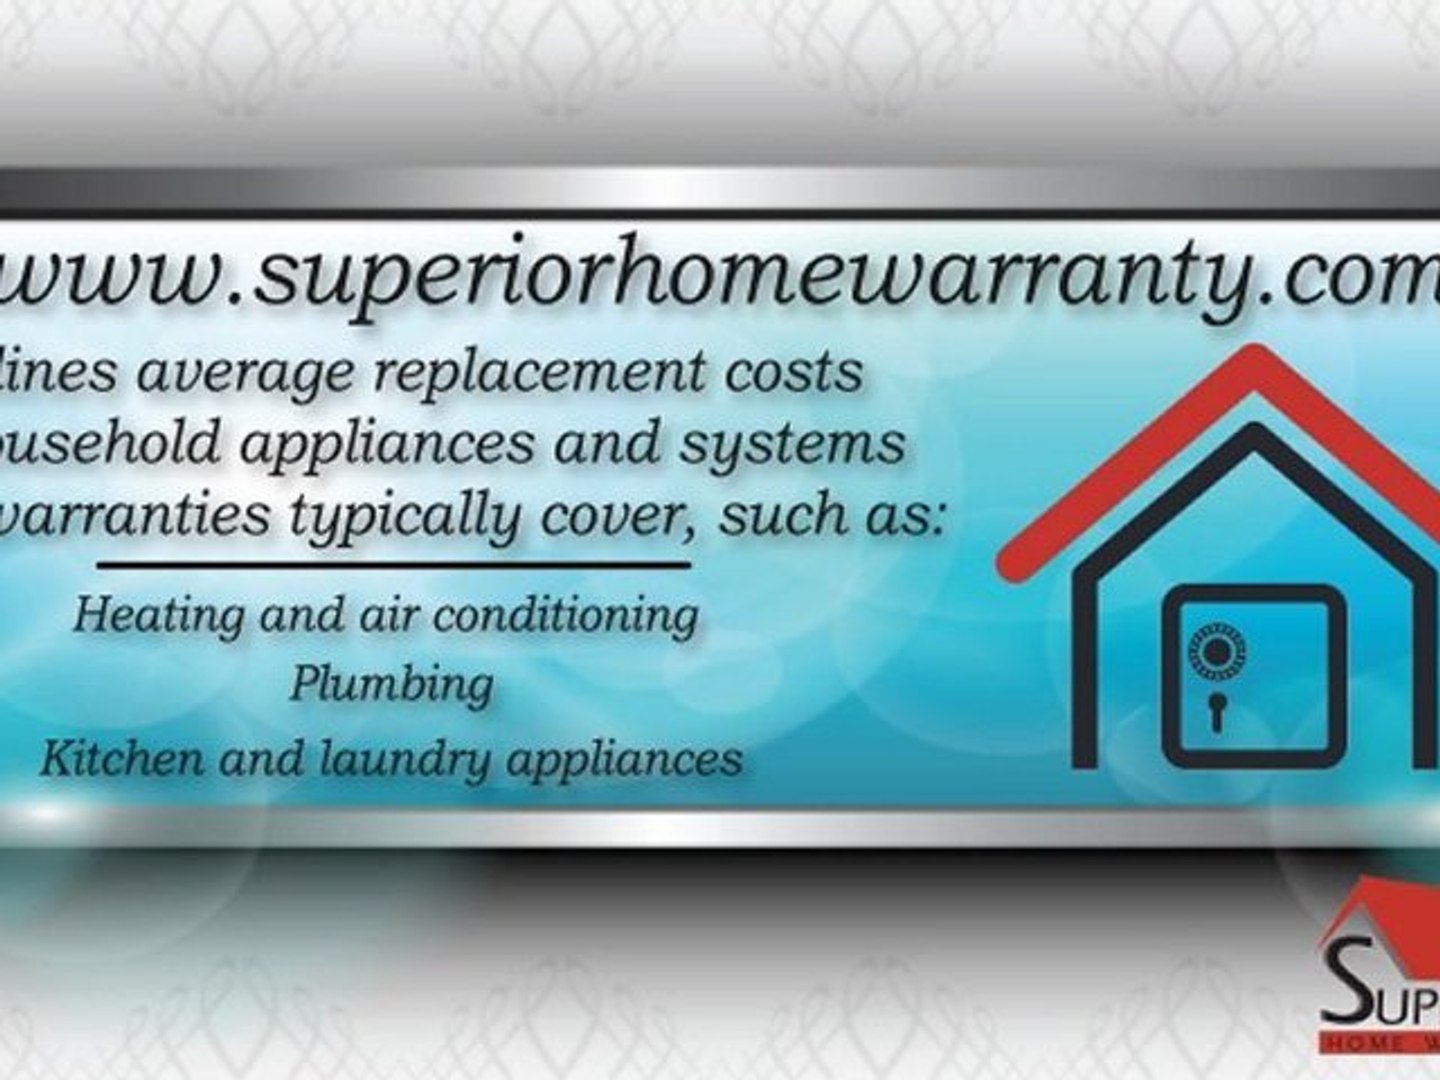 ⁣Home Warranty Advice from the experts